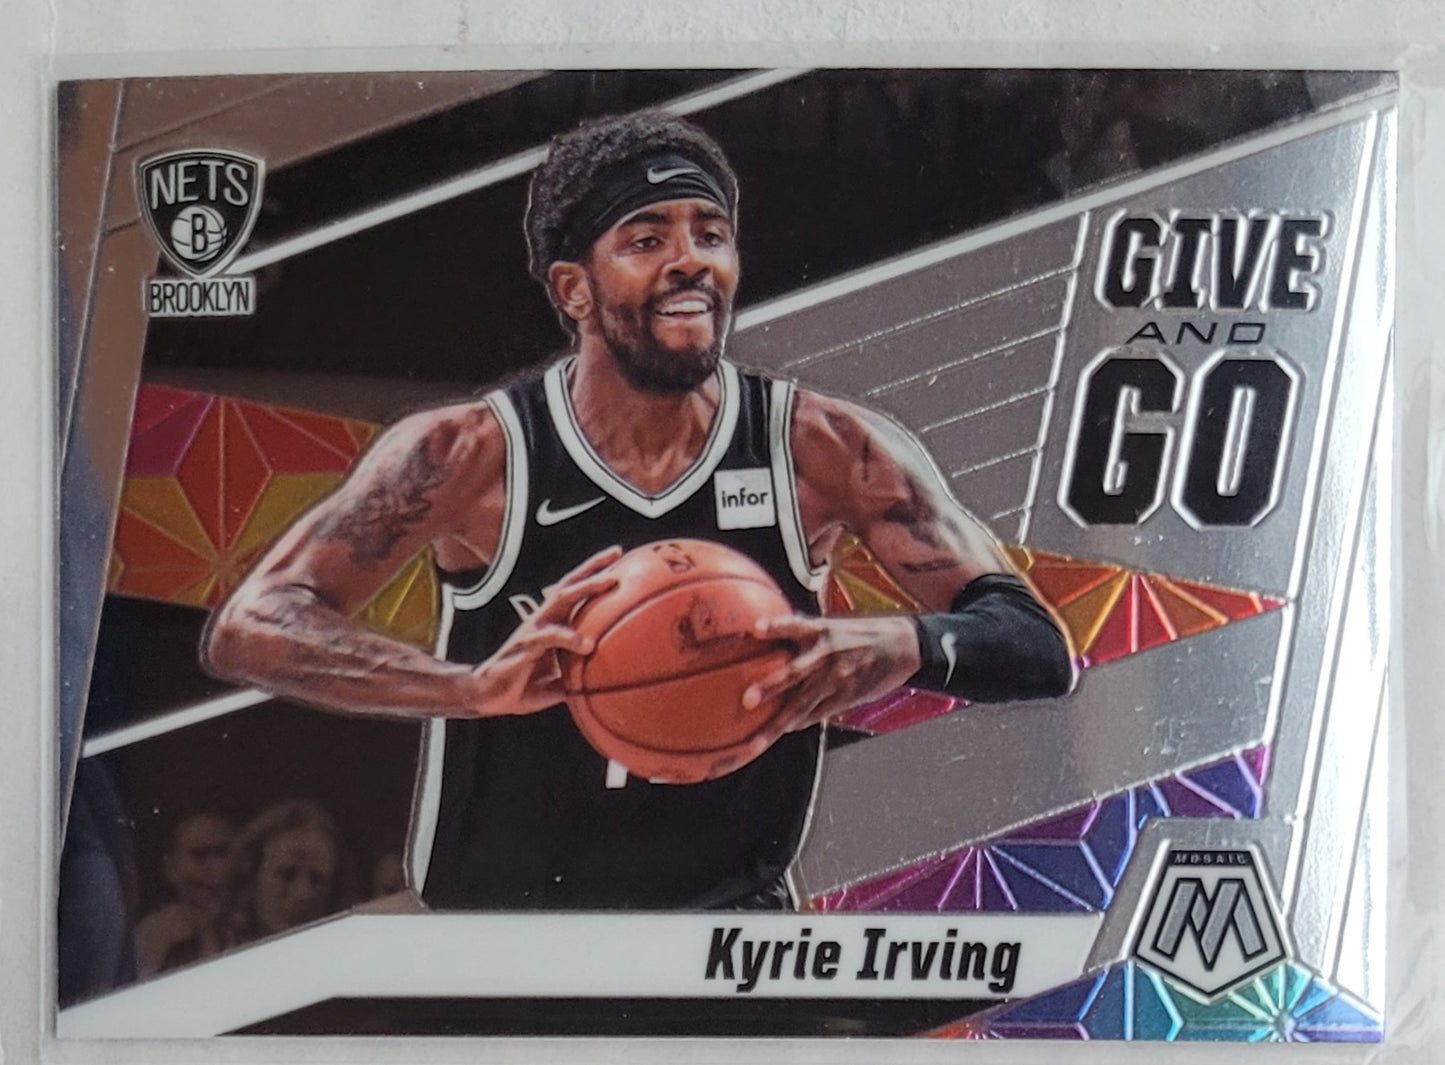 Kyrie Irving - 2019-20 Panini Mosaic Give and Go #1